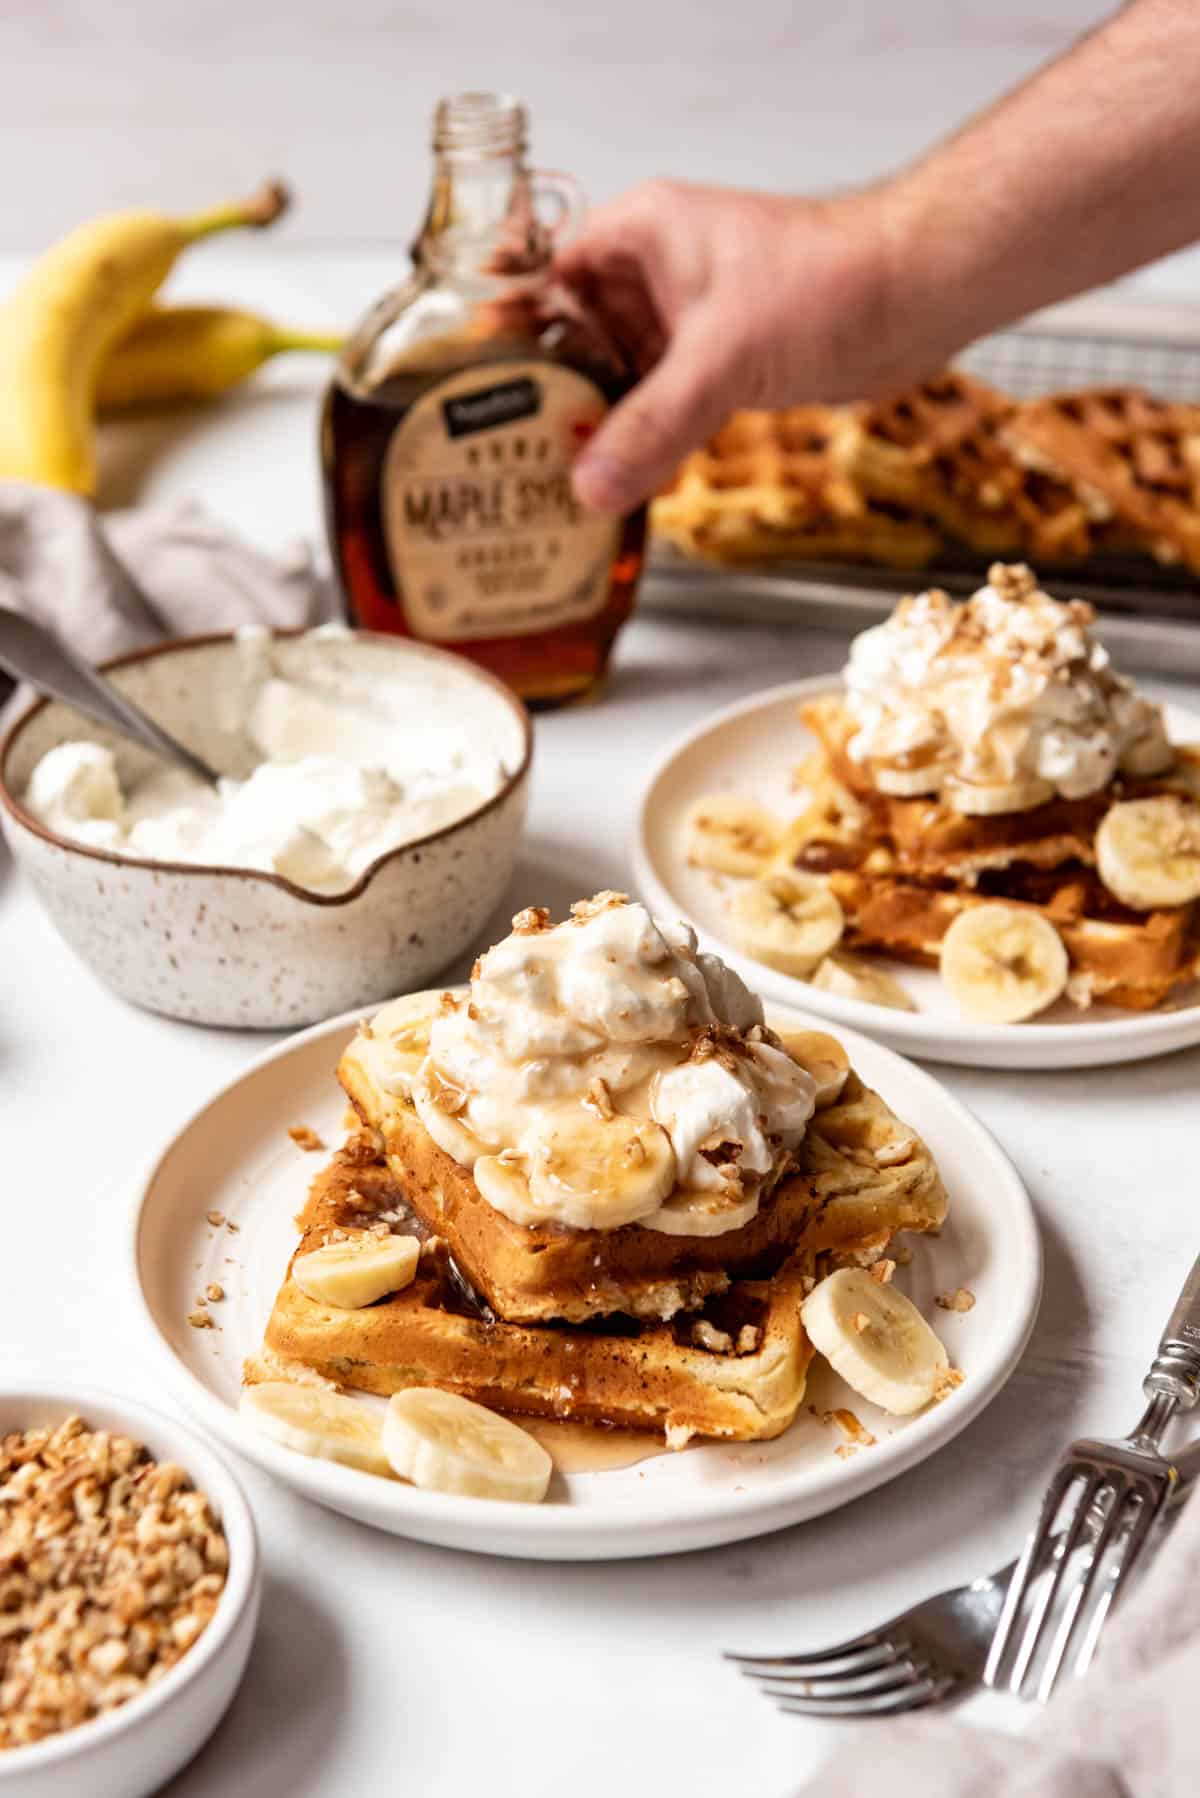 A hand reaching for maple syrup to pour over plates of banana pecan waffles.